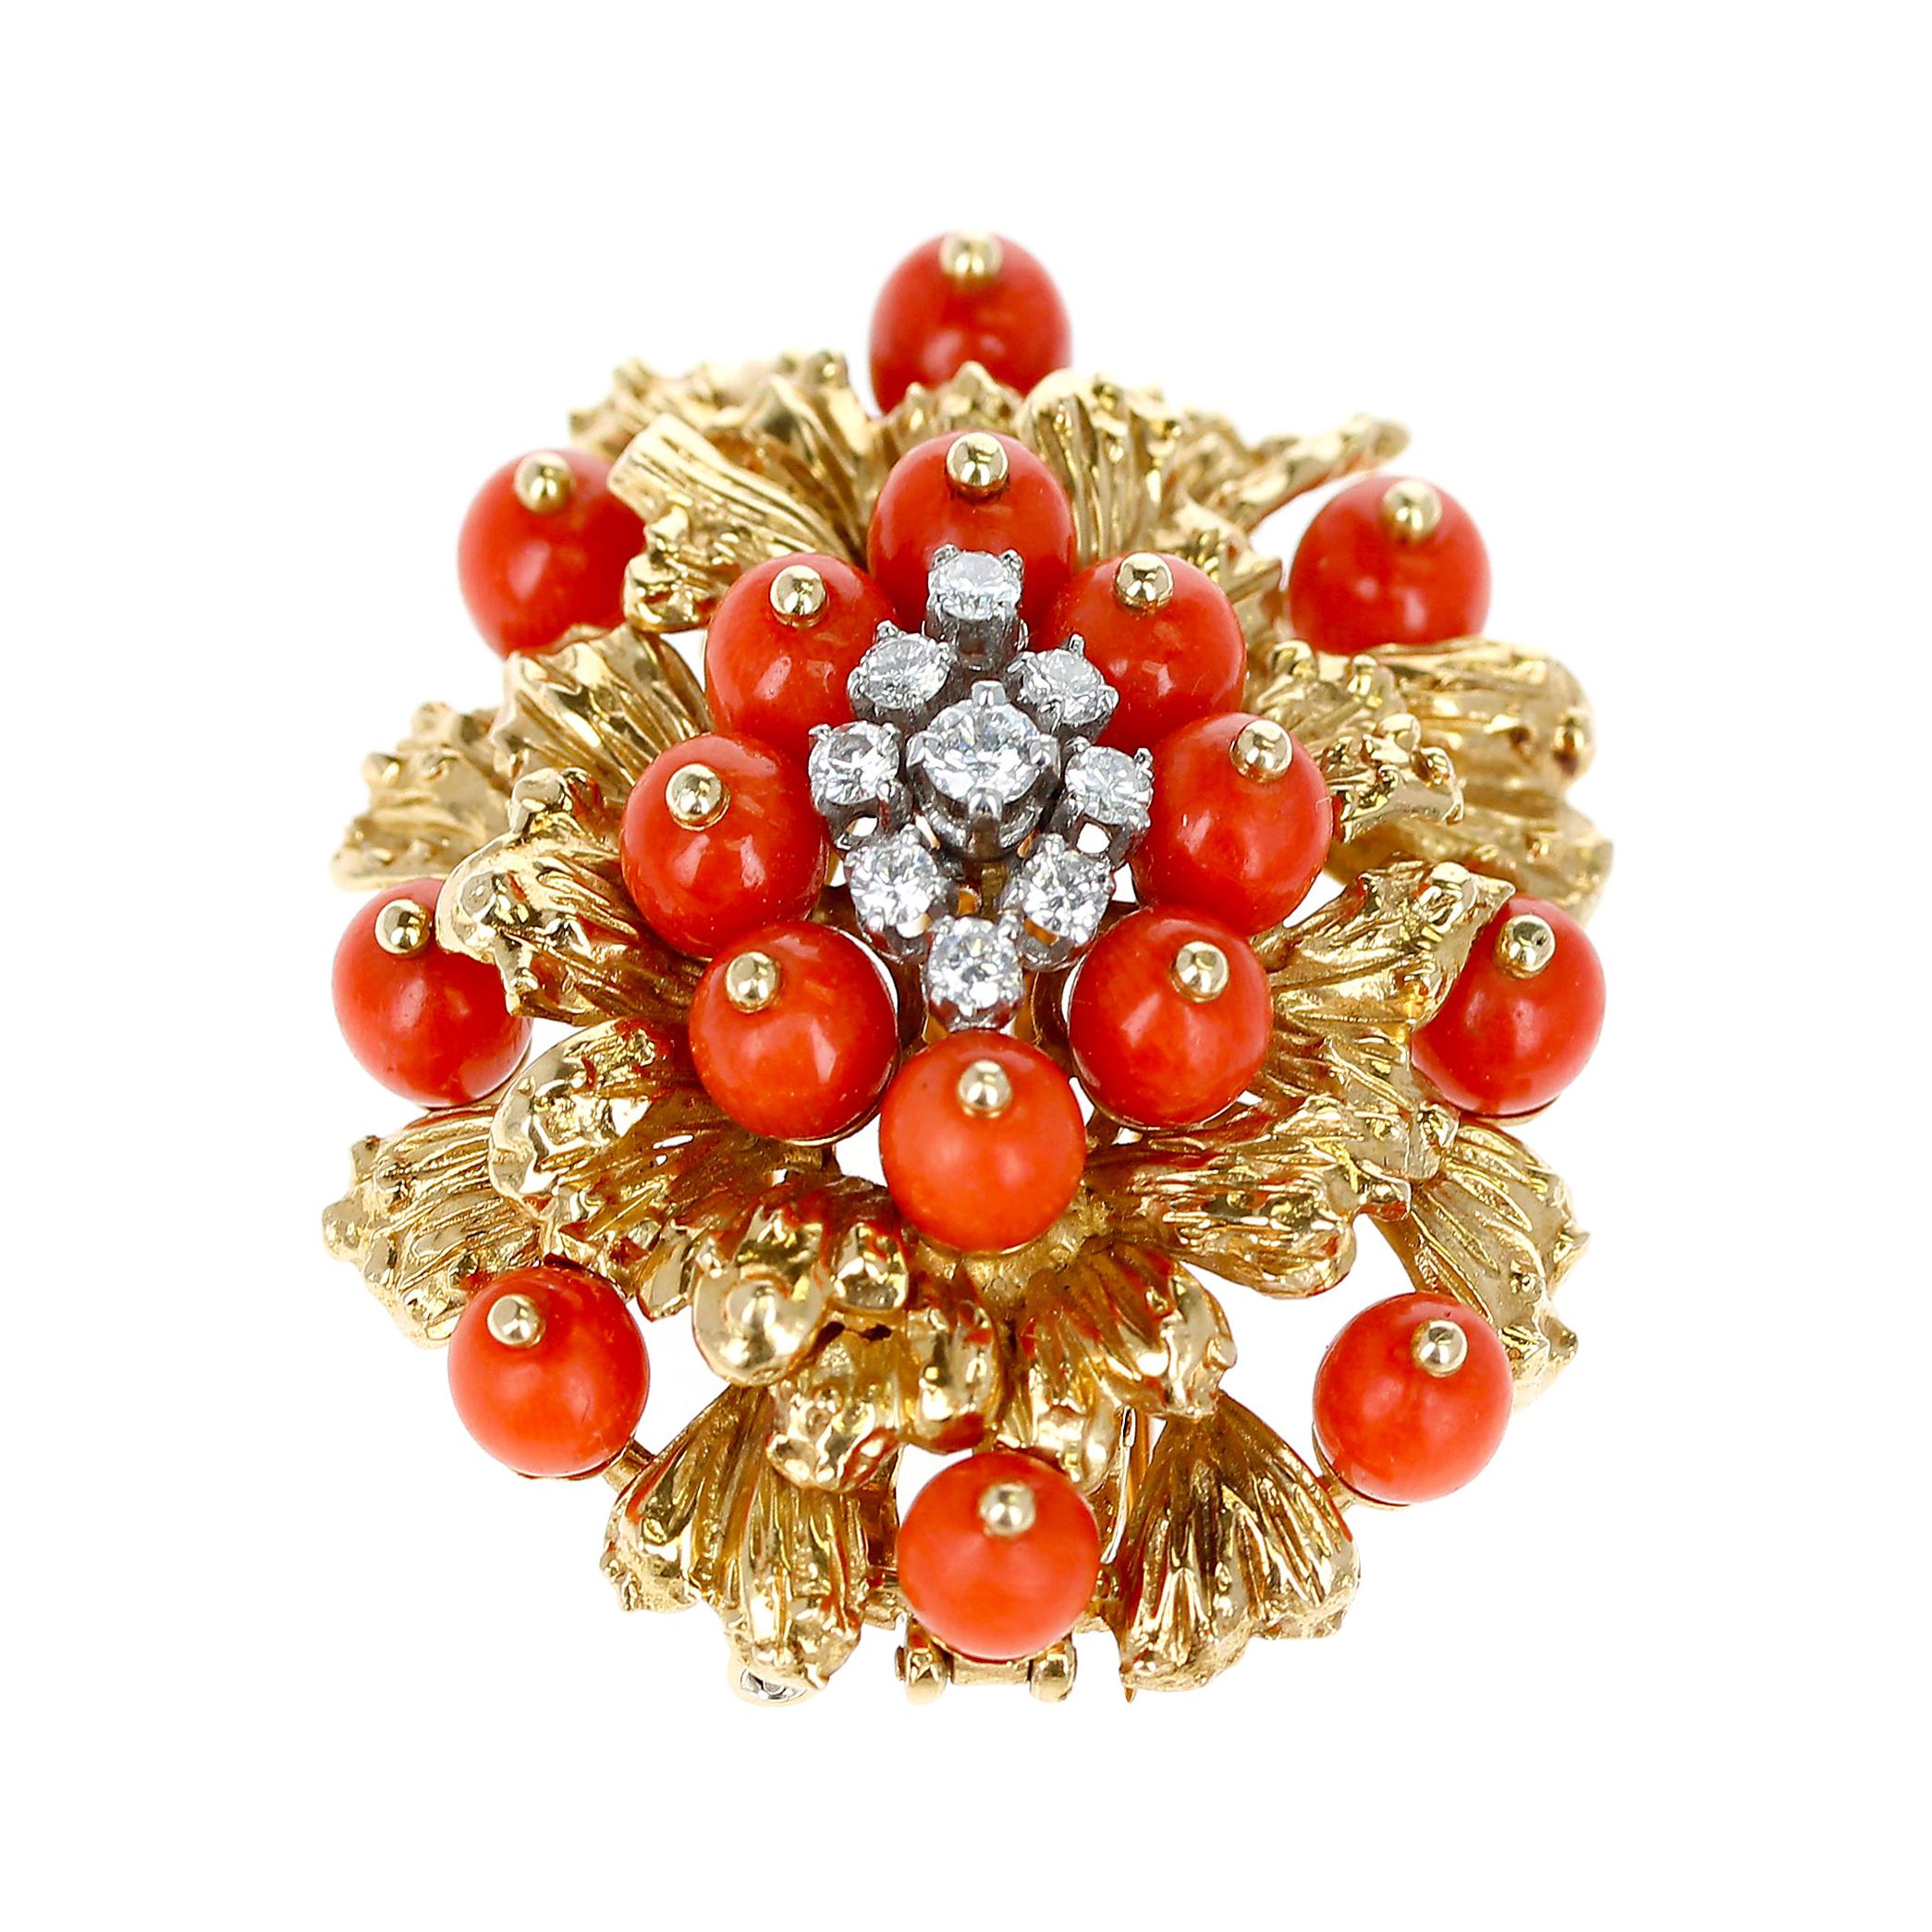 Cartier Coral, Diamonds, and 18 Karat Gold Brooch and Pendant